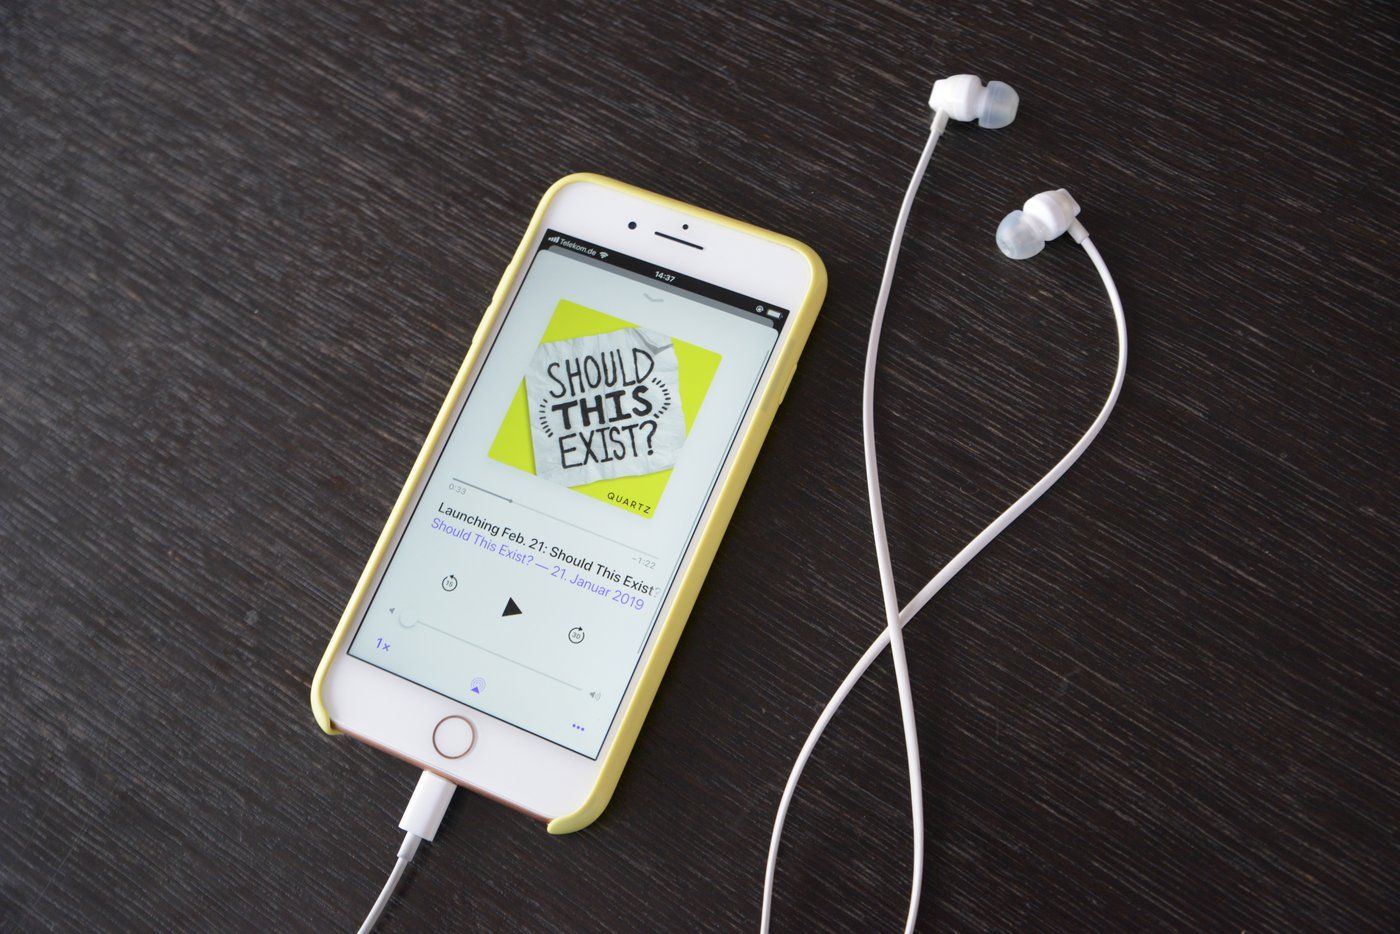 Burda supports podcast creator Wait What with follow-on investment